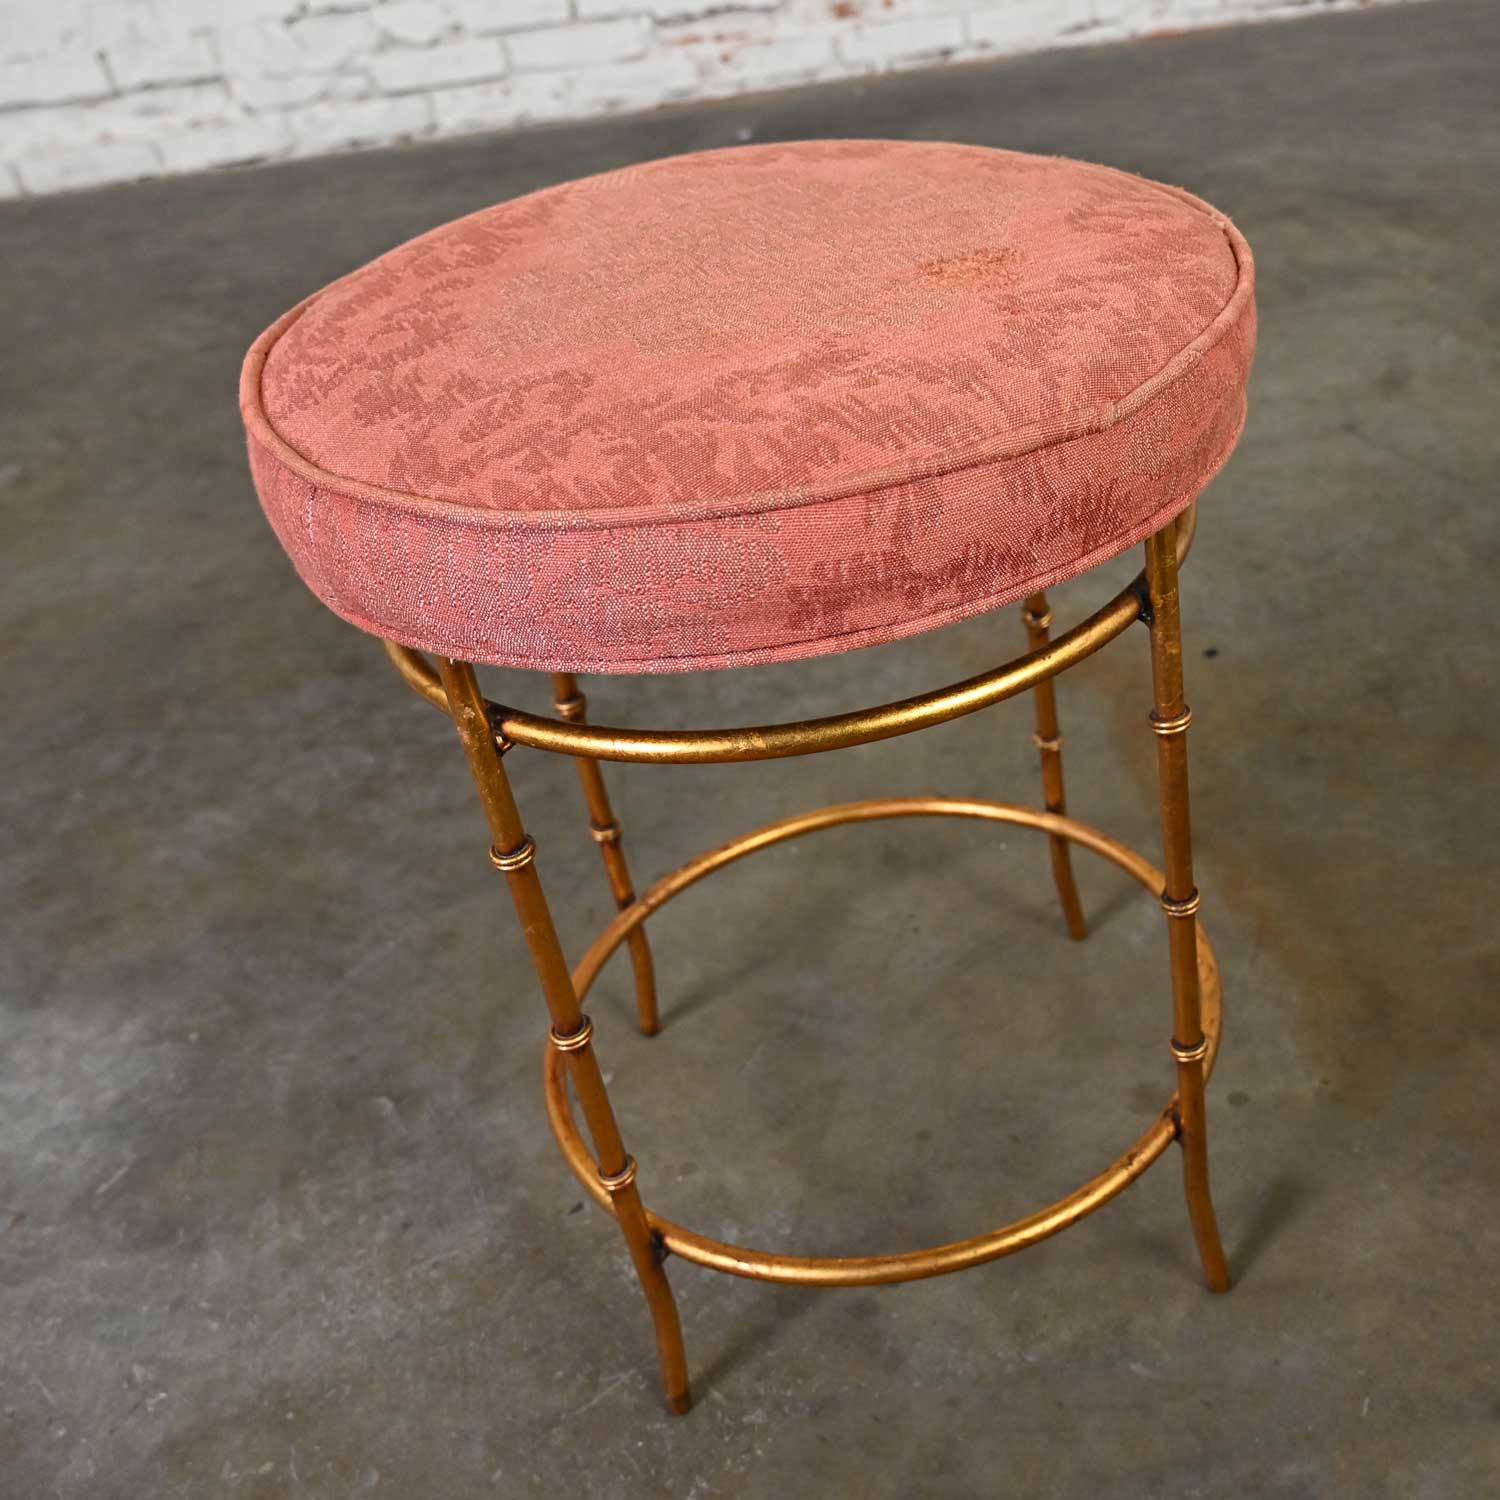 Mid-20th Century Italian Style Round Stool with Rose Damask Seat & Gilt Metal Faux Bamboo Legs